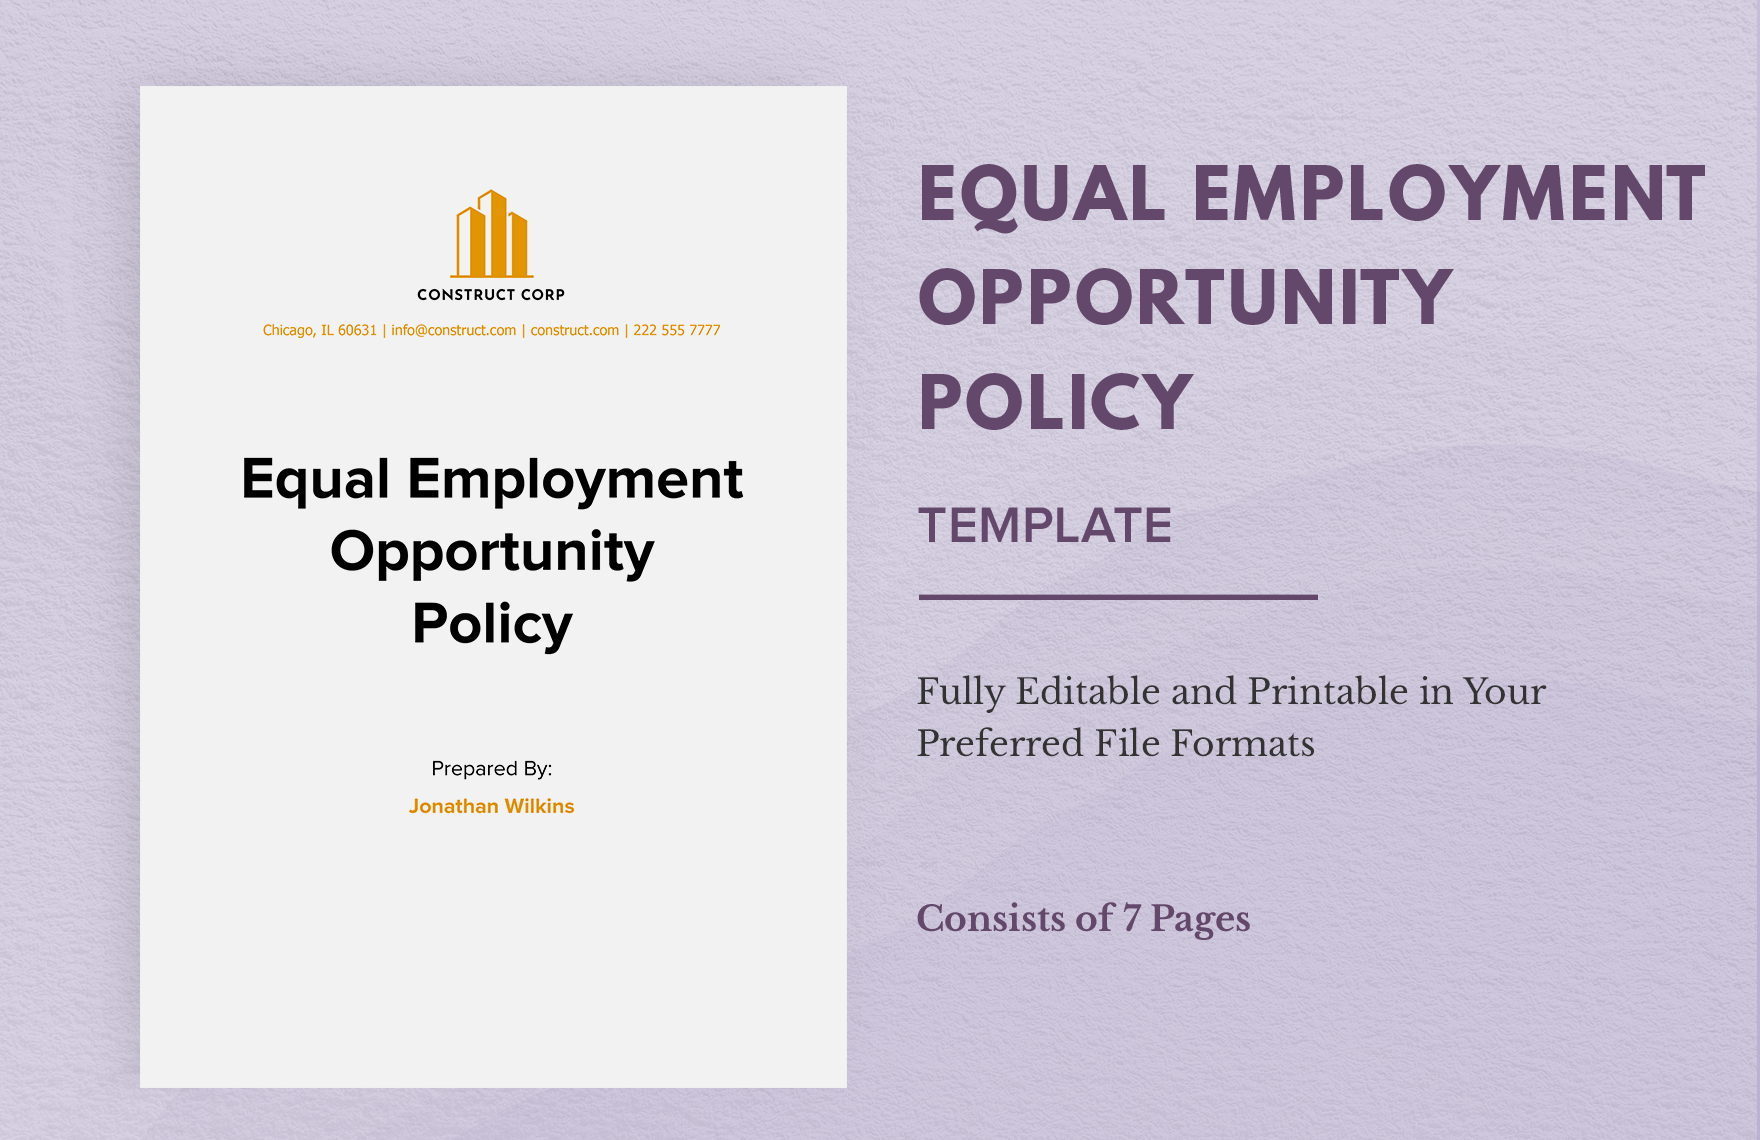 Equal Employment Opportunity Policy Template